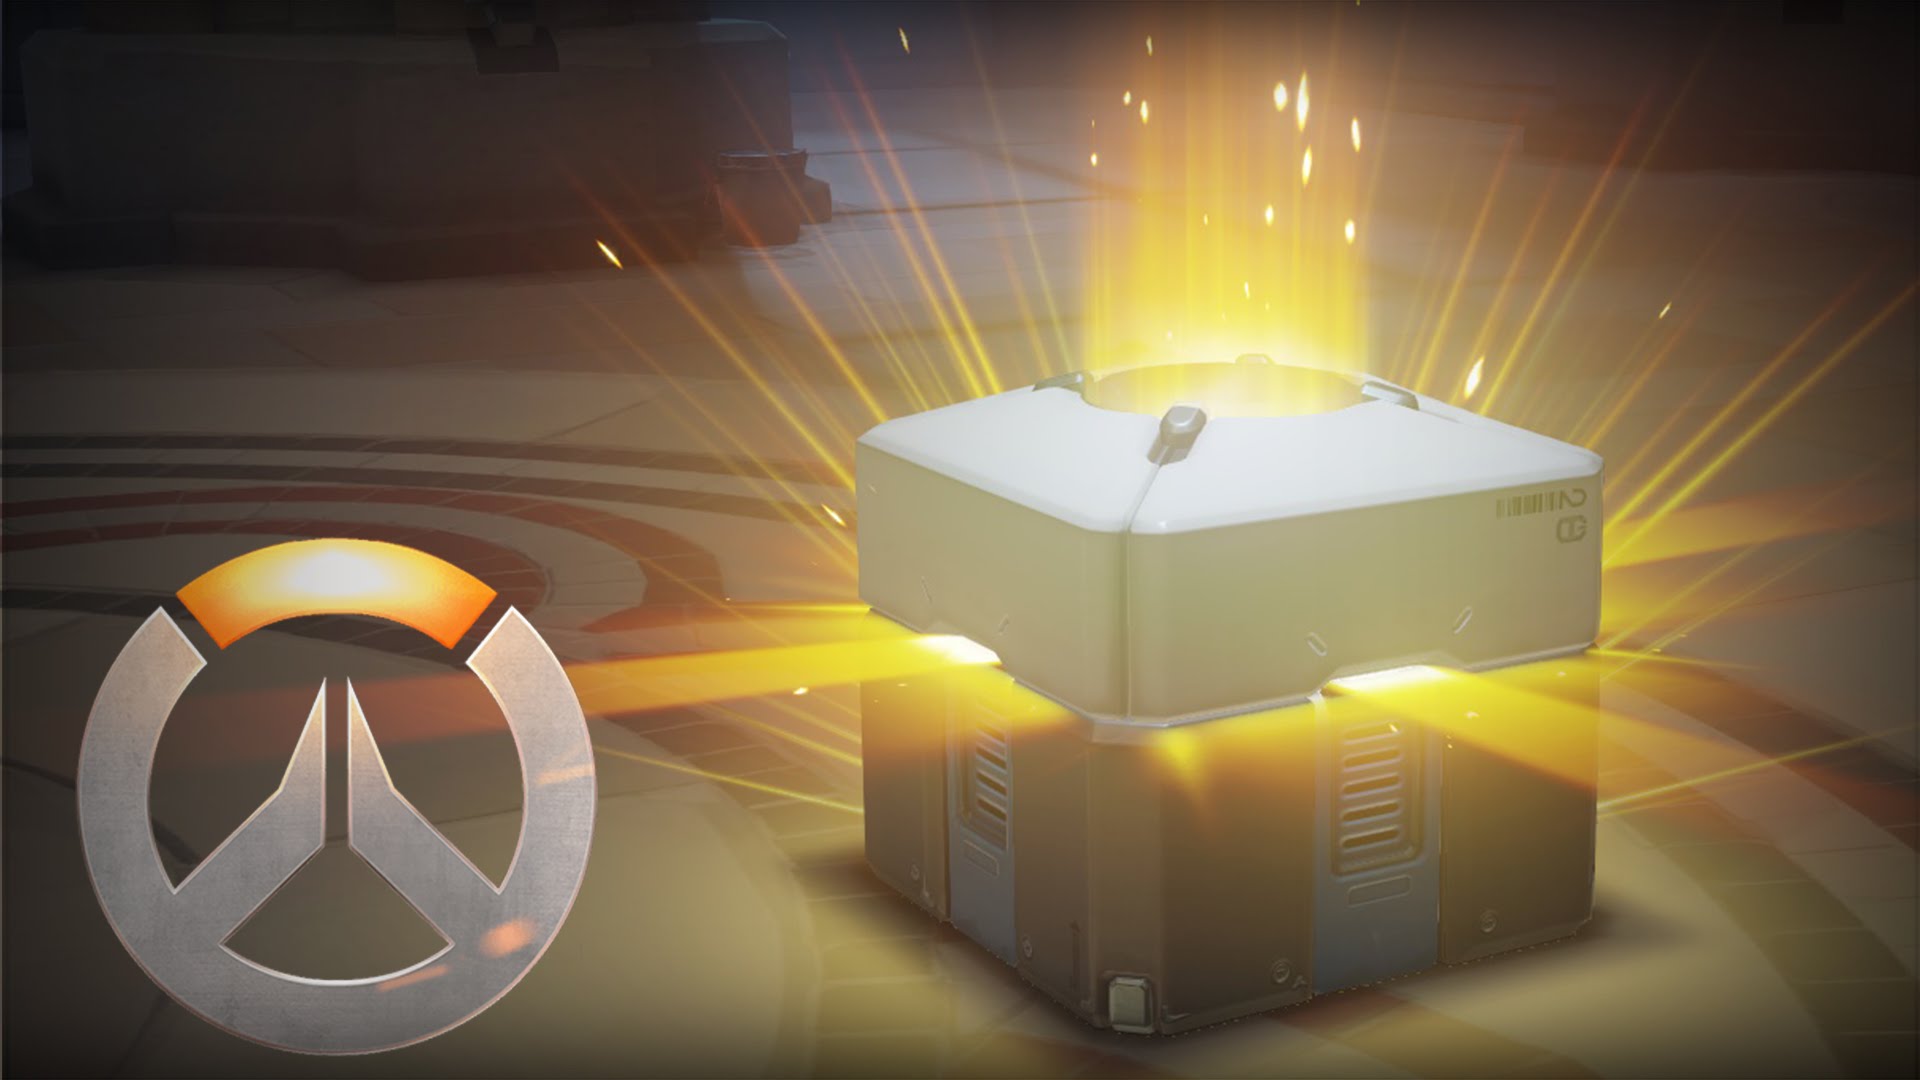 Loot Box Addiction: Dangers of Loot Boxes